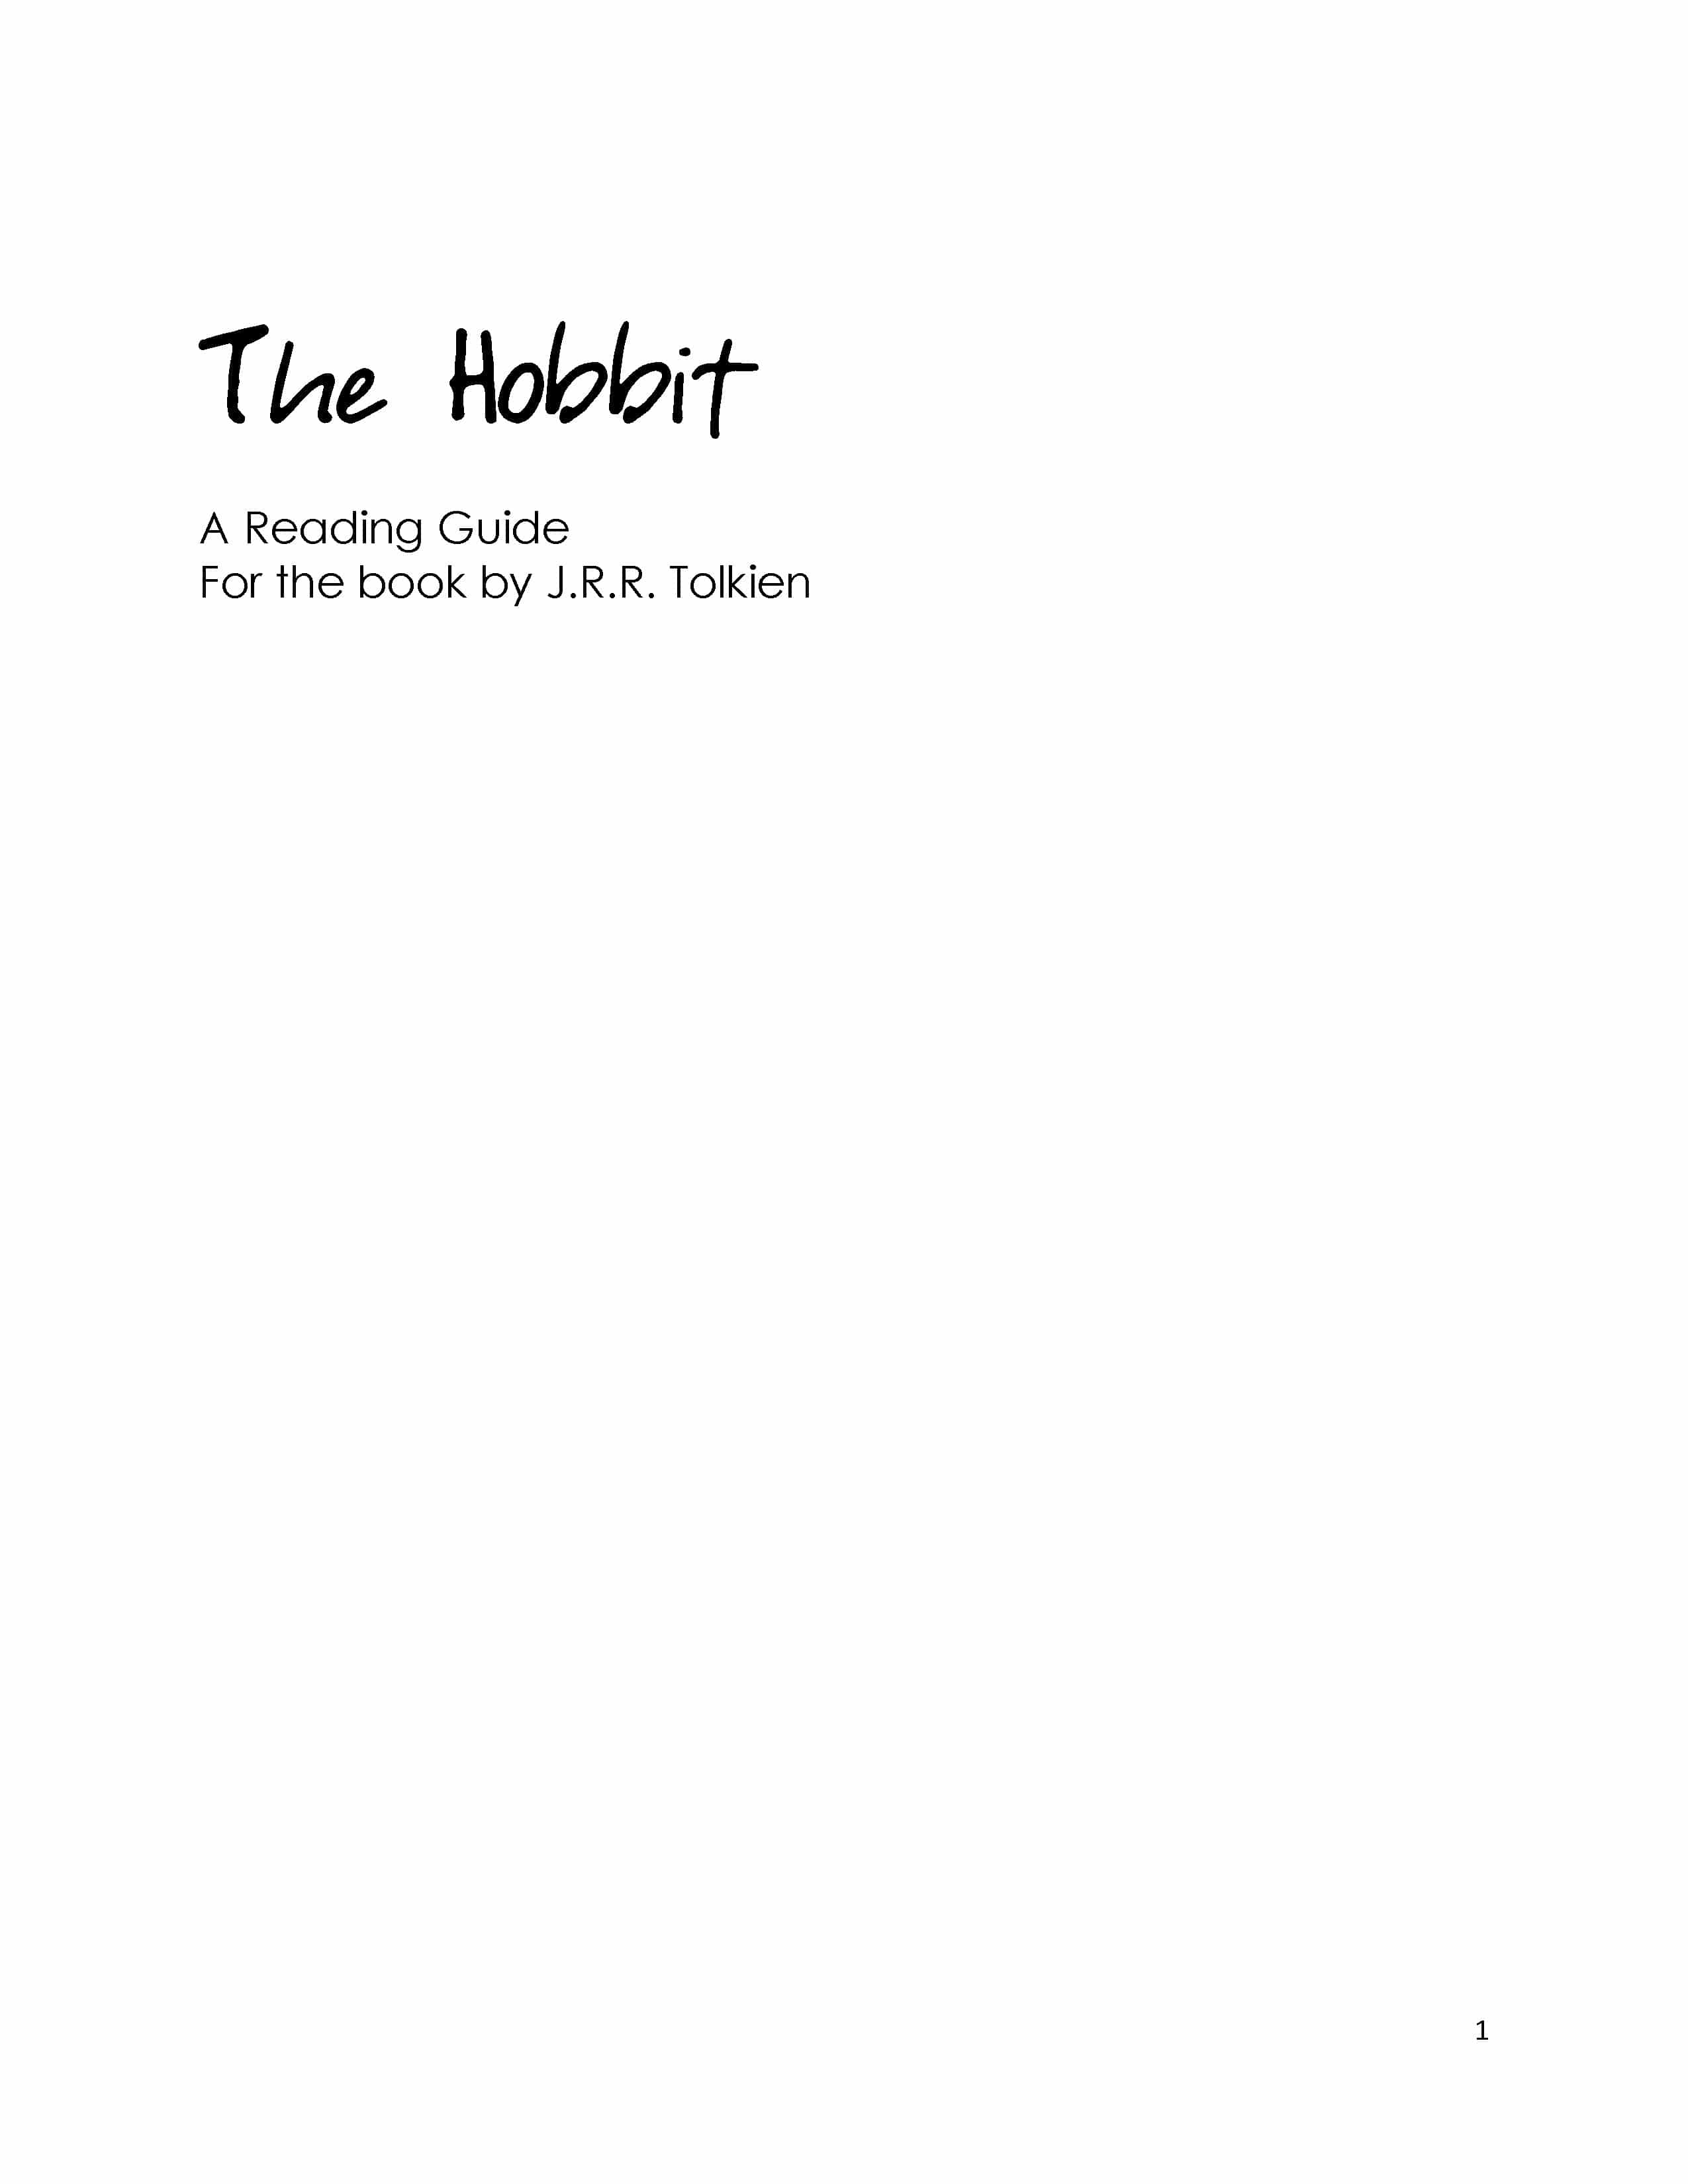 The Hobbit Reading Guide (Download)